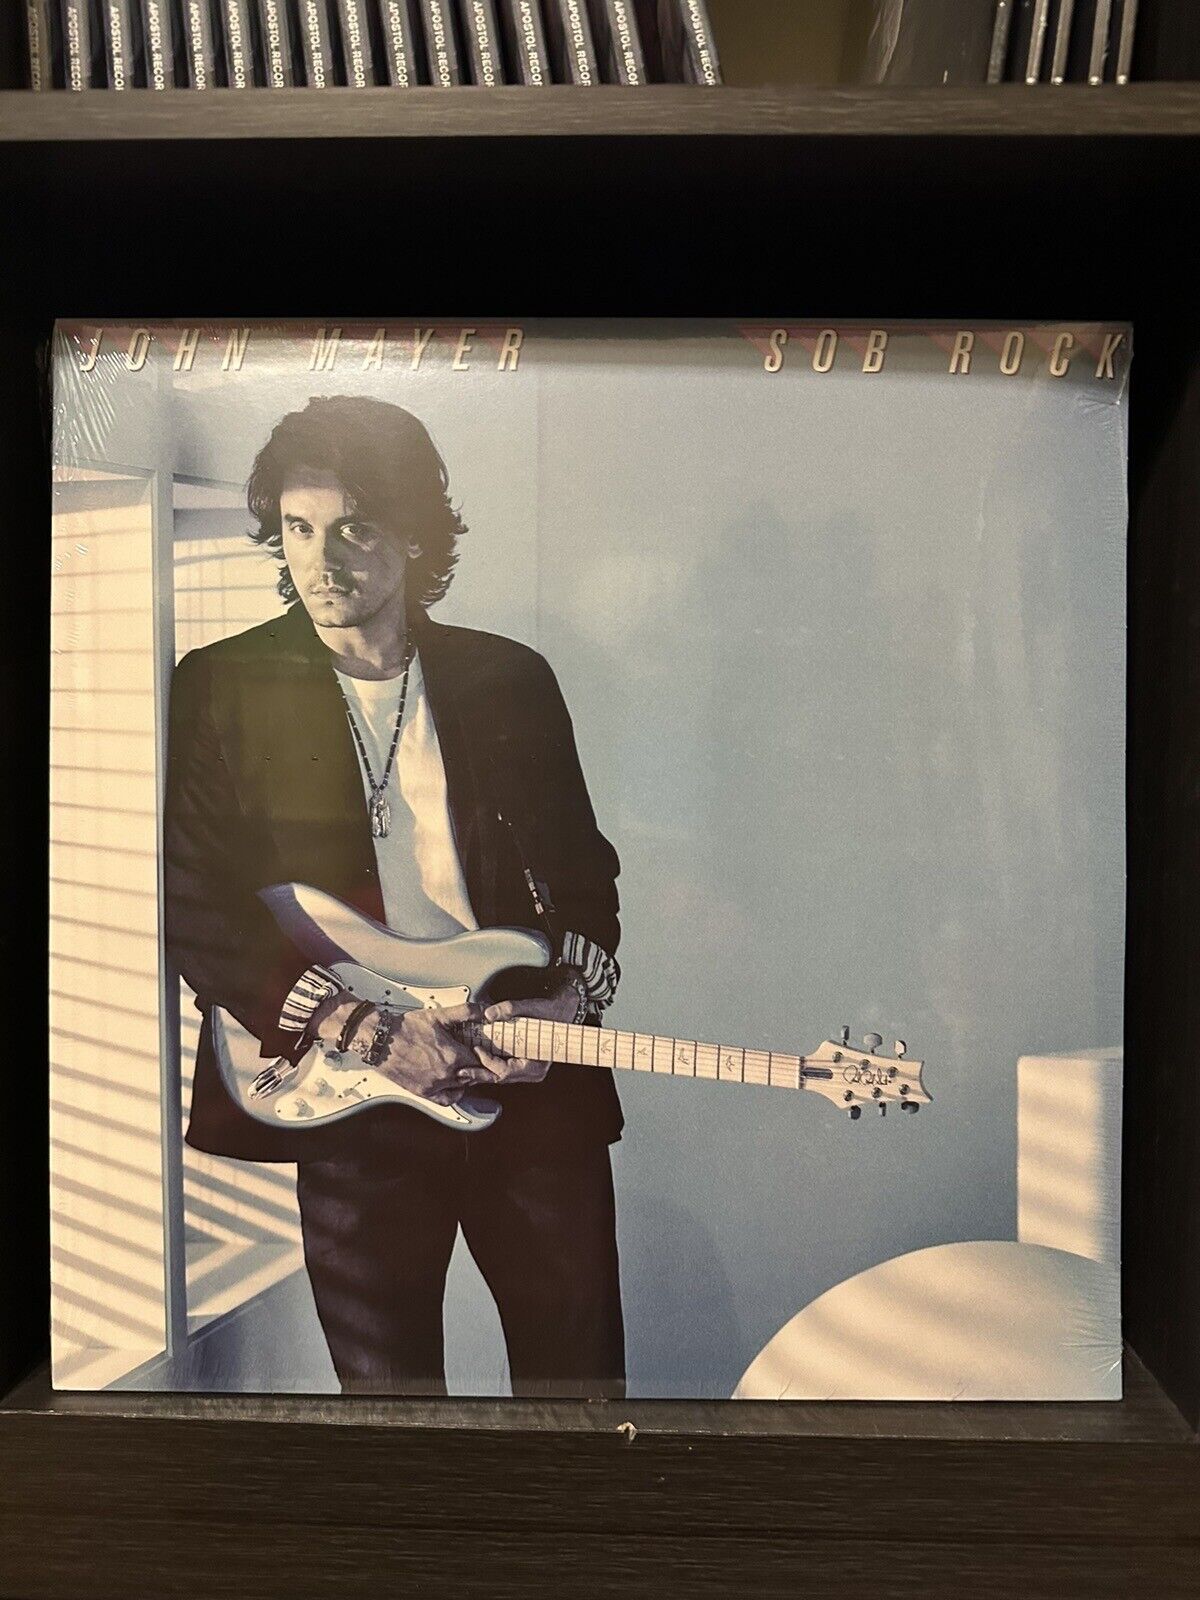 John Mayer - Sob Rock Limited Edition Triple Swirl Vinyl SOLD OUT - In Hand